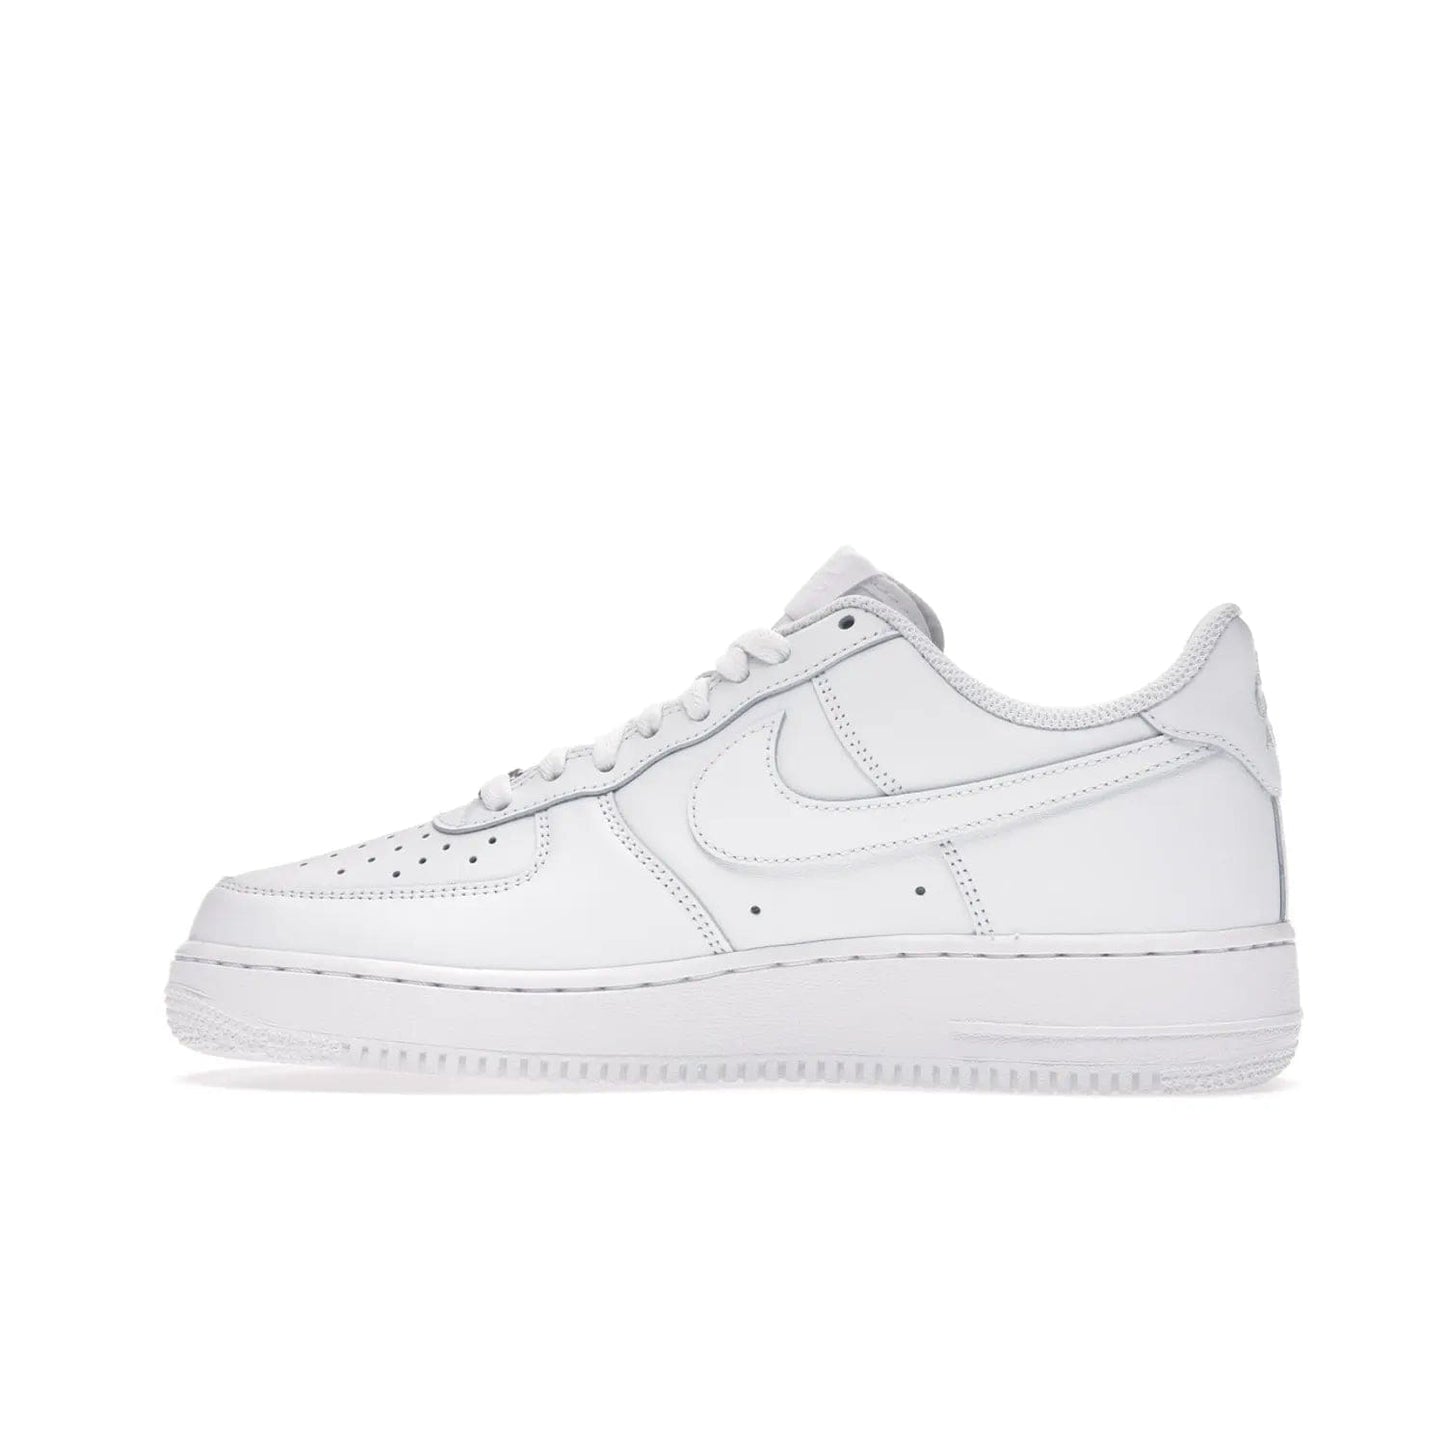 Nike Air Force 1 Low '07 White - Image 20 - Only at www.BallersClubKickz.com - ##
Iconic Swoosh overlays and crisp white sole make the classic Nike Air Force 1 Low White '07 an essential colorway. Classic for seasoned heads and new fans alike.